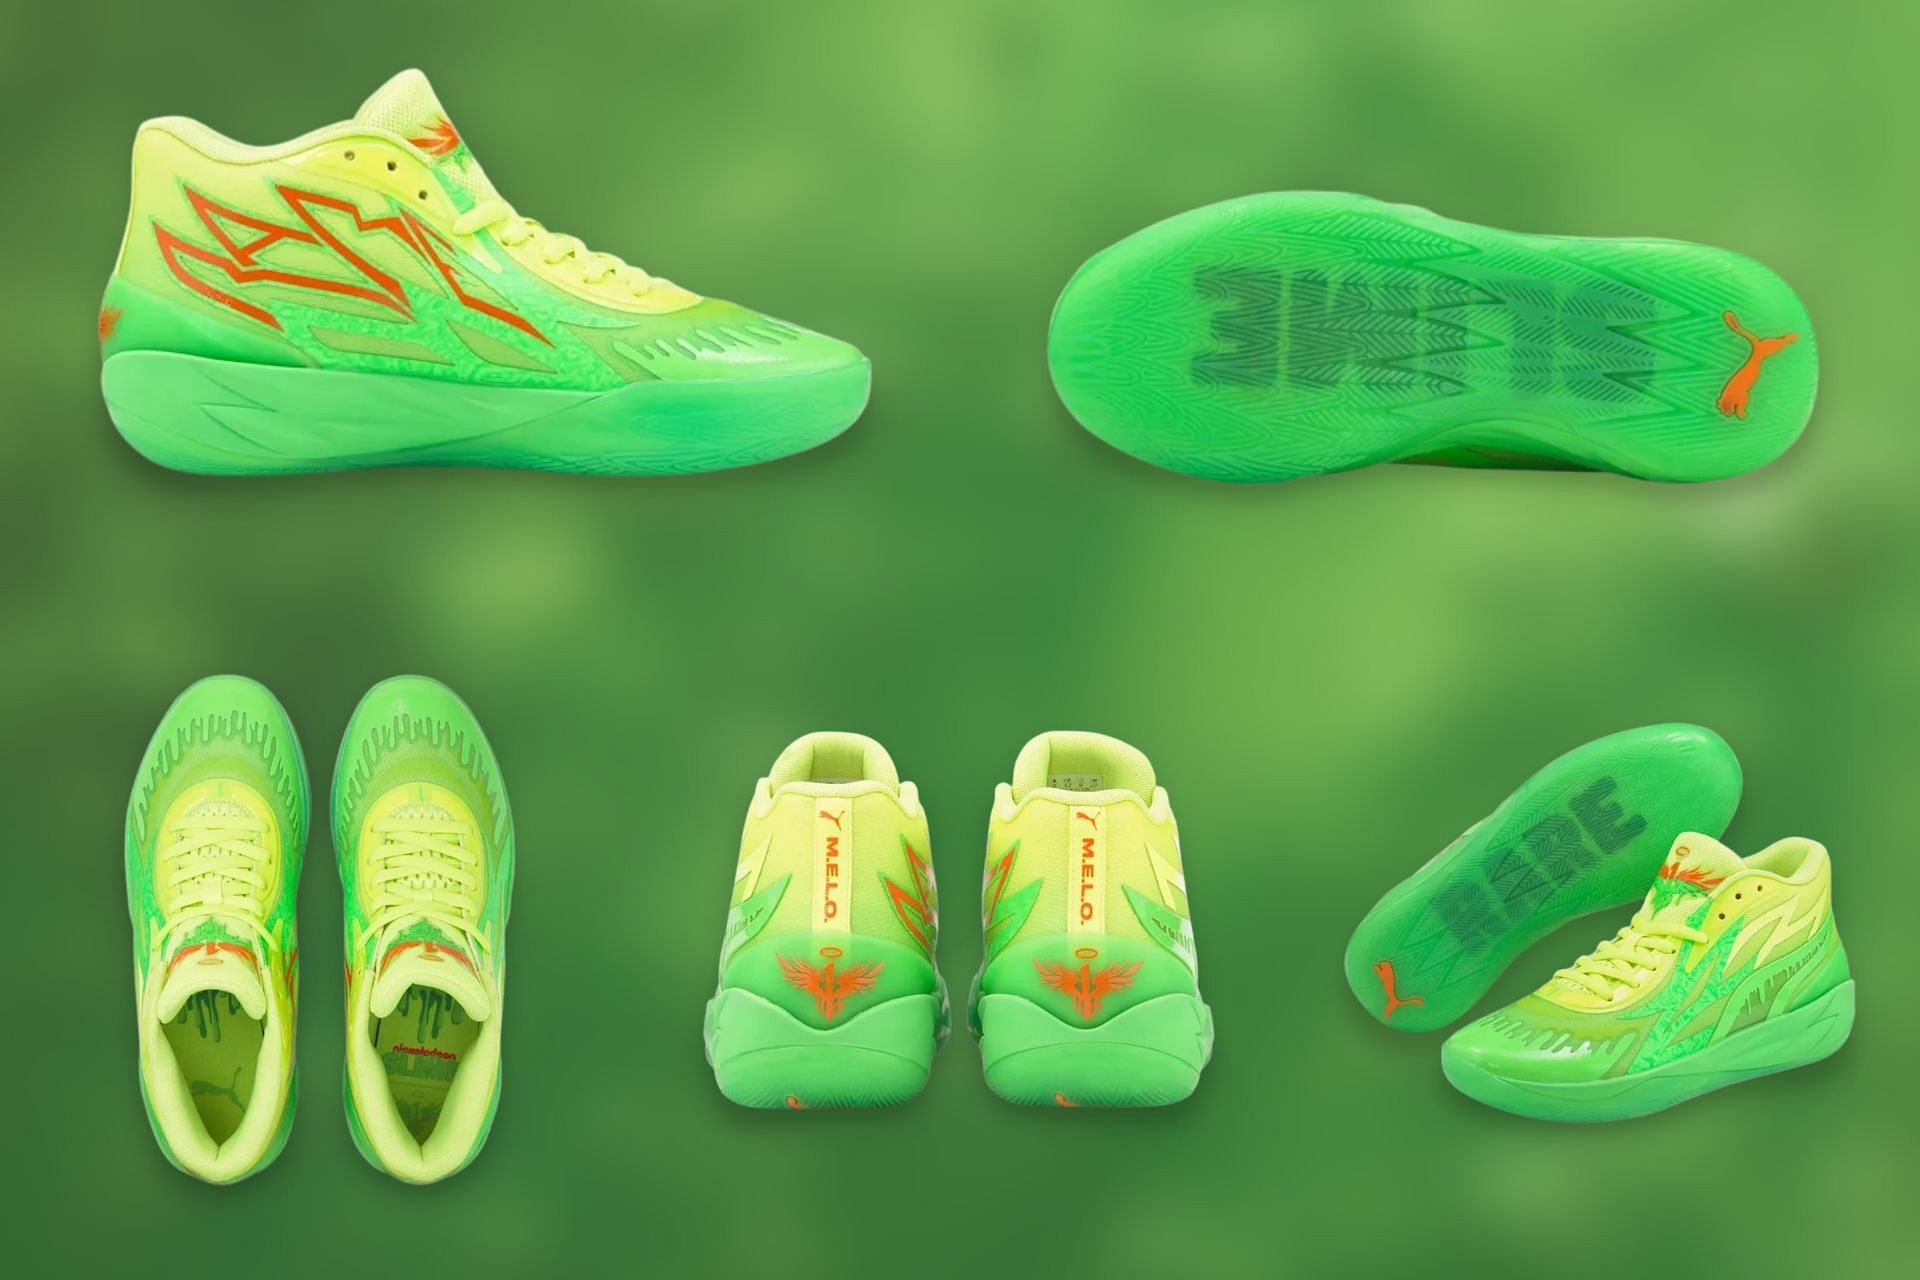 MB.02: Nickelodeon x Puma MB.02 “Slime” shoes: Where to buy, release ...